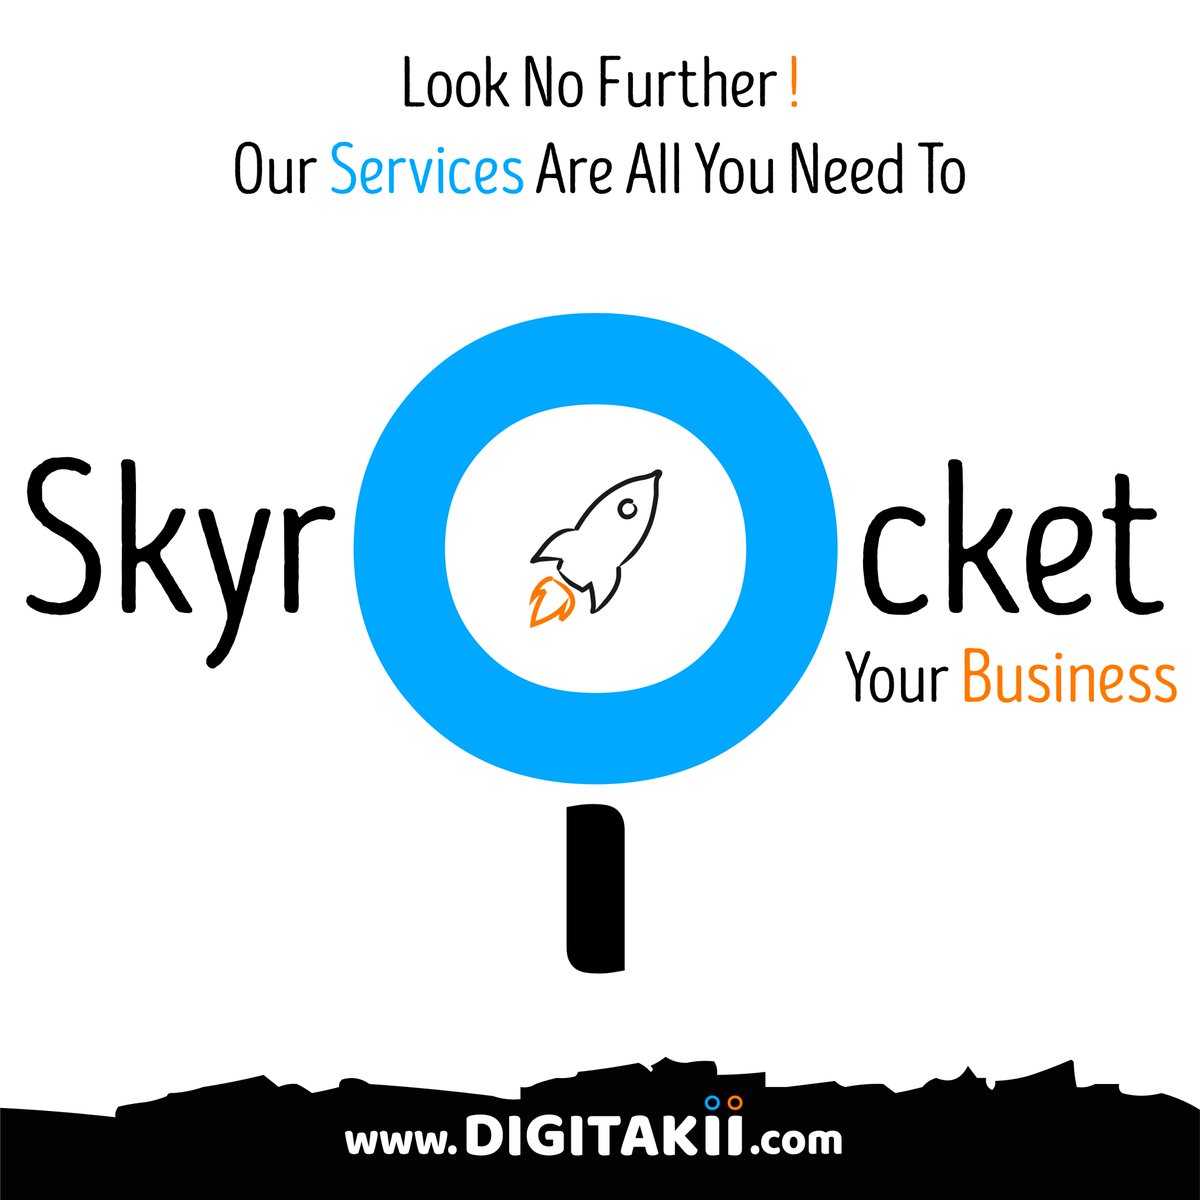 Look No Further! Our Services Are All You Need To Skyrocket Your Business

Discover our services : digitakii.com/services

#DigitalMarketing #OnlinePresence #SocialMedia #SEO #ContentMarketing #BrandStrategy #WebDevelopment #DigitalStrategy #Optimization #MarketingROI #Digitakii